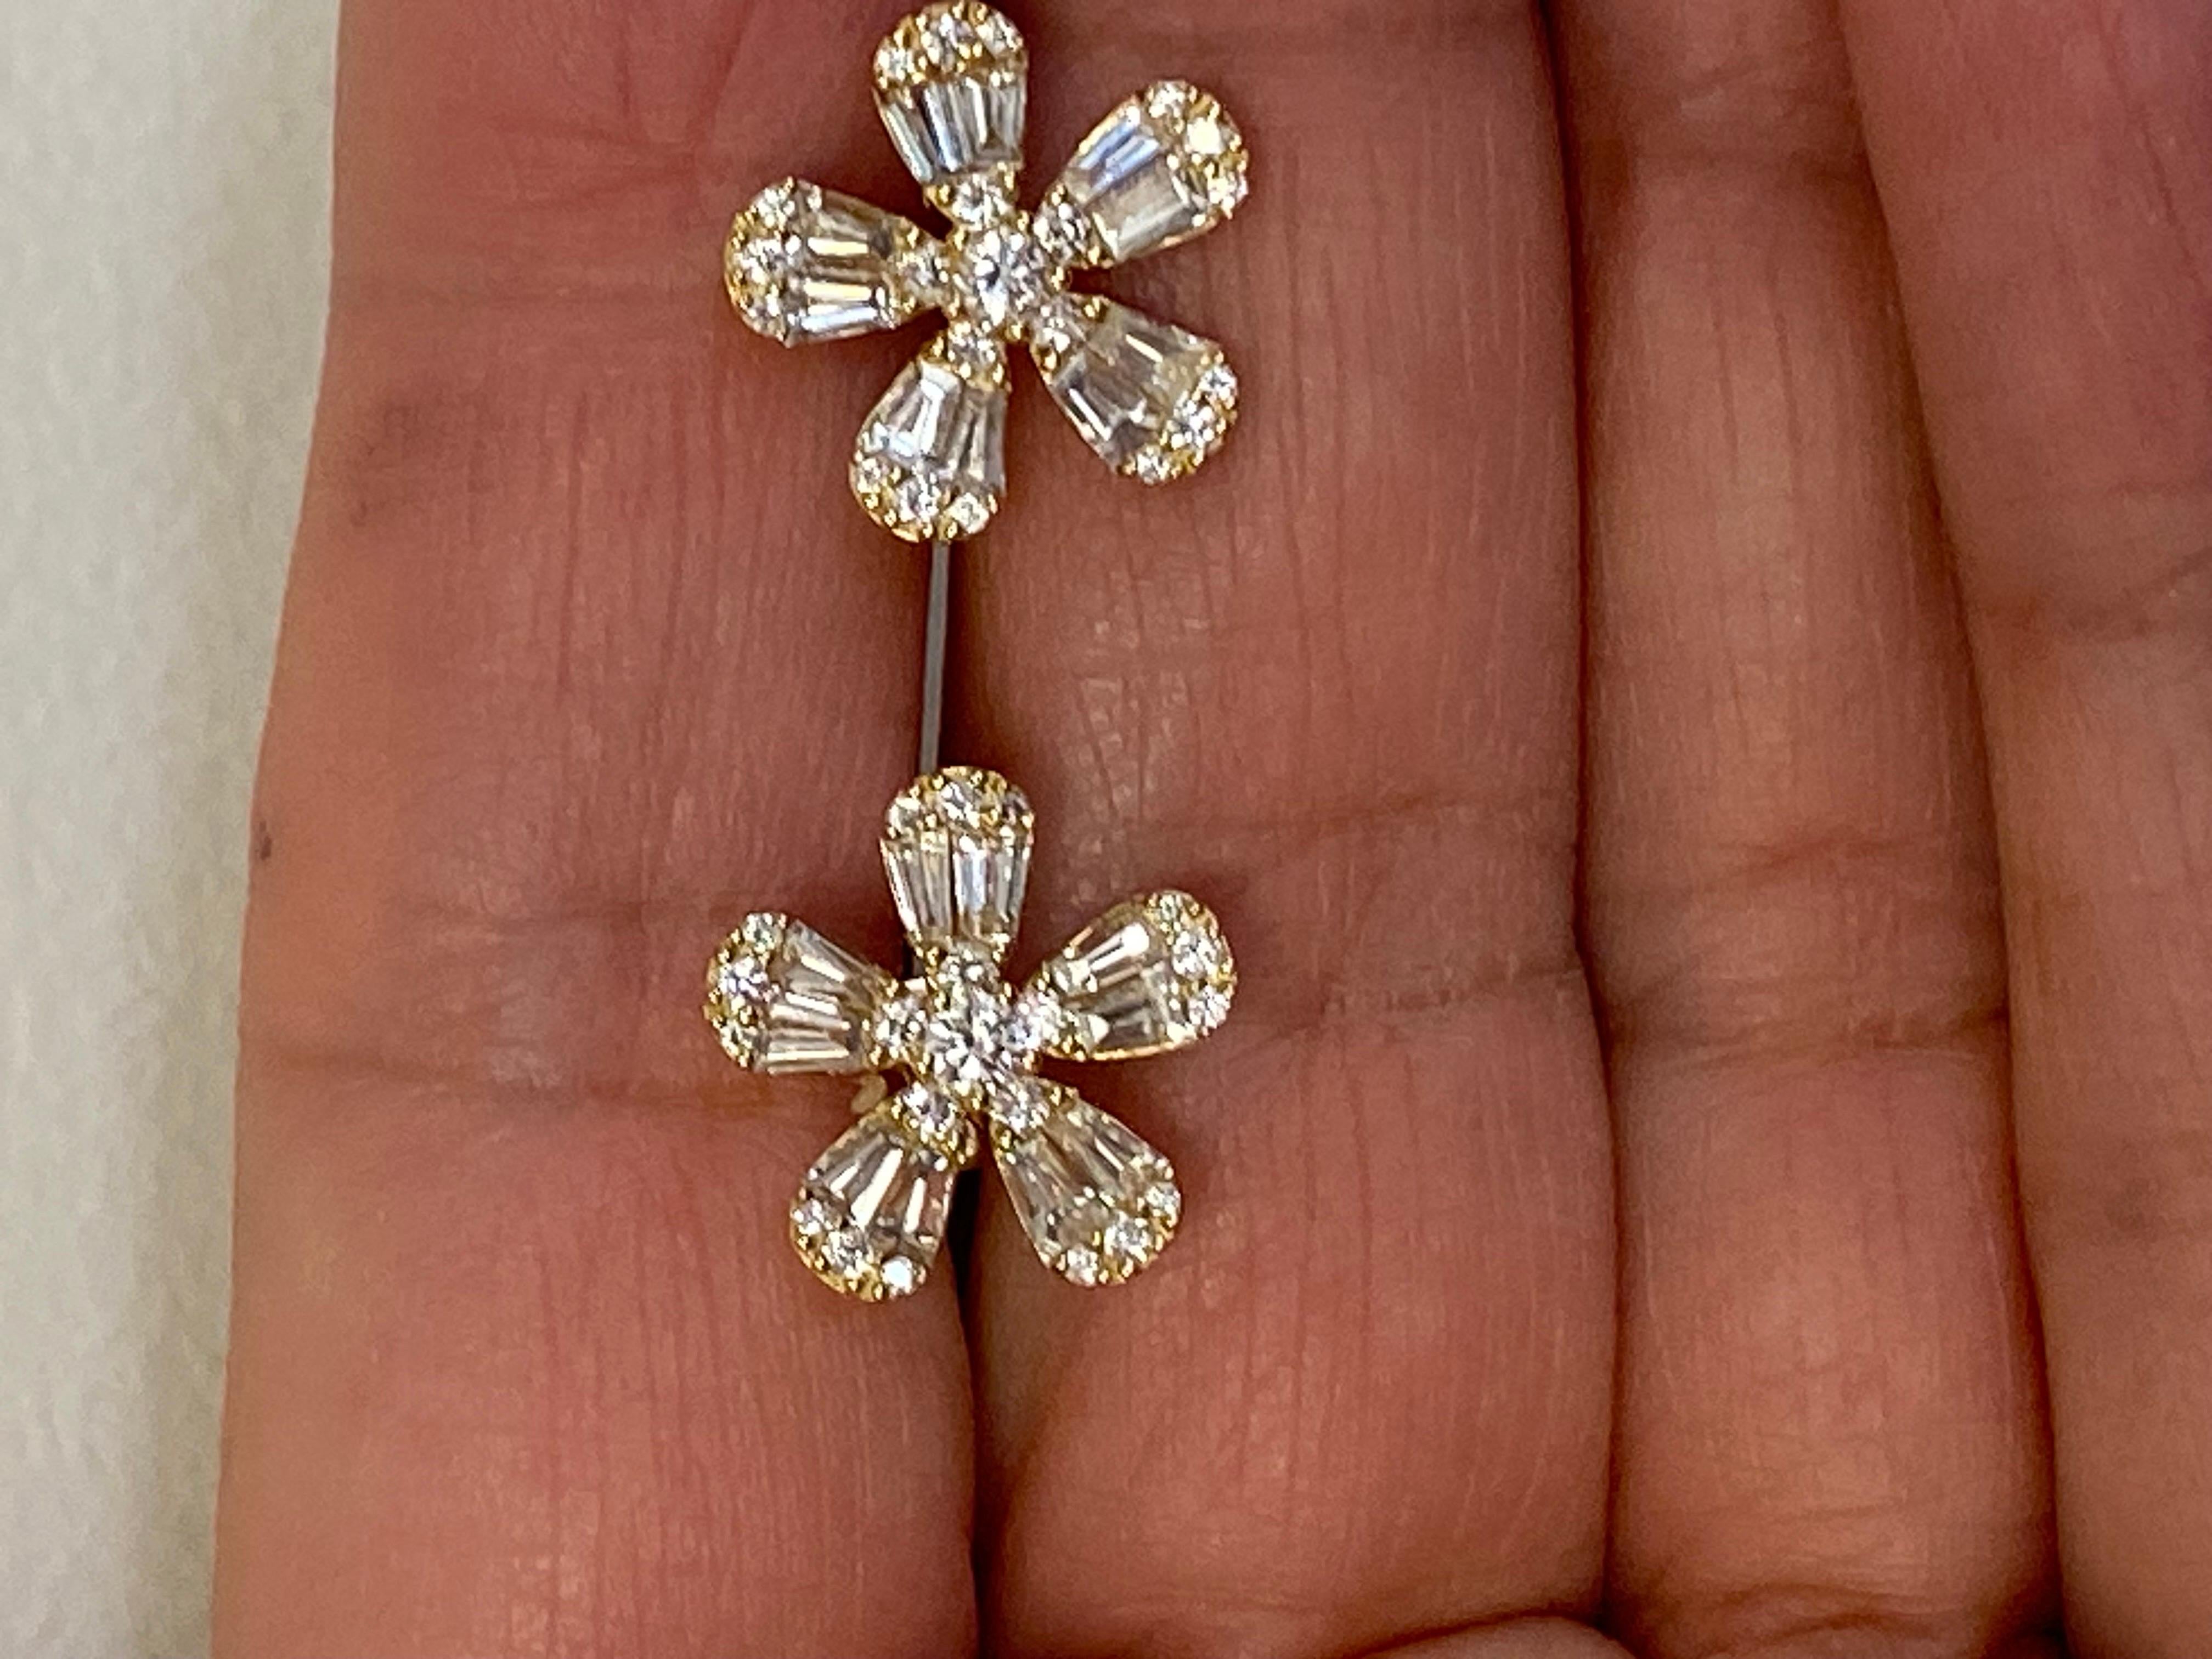 Daisy shaped yellow earrings set with baguette and round diamonds. The total weight of the earrings is 1.37 carats. The color of the stones are F, the clarity is VS1. The earrings are set in 18K yellow gold and are available in white.